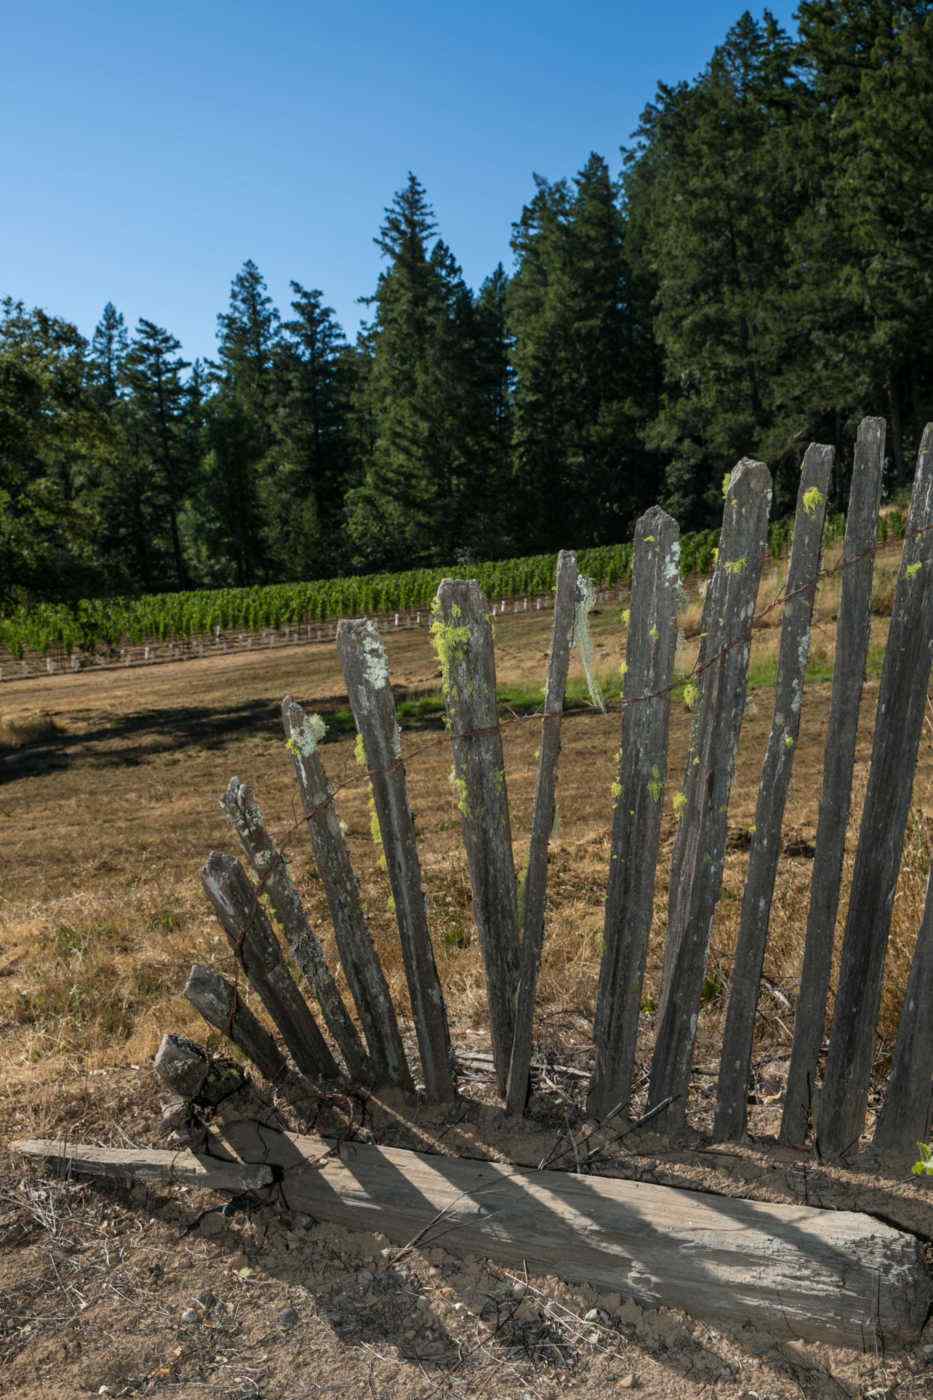 Home Ranch Vineyard at our Fort Ross-Seaview vineyards – original hand-split redwood fence used to keep the sheep inside from the 1860’s.